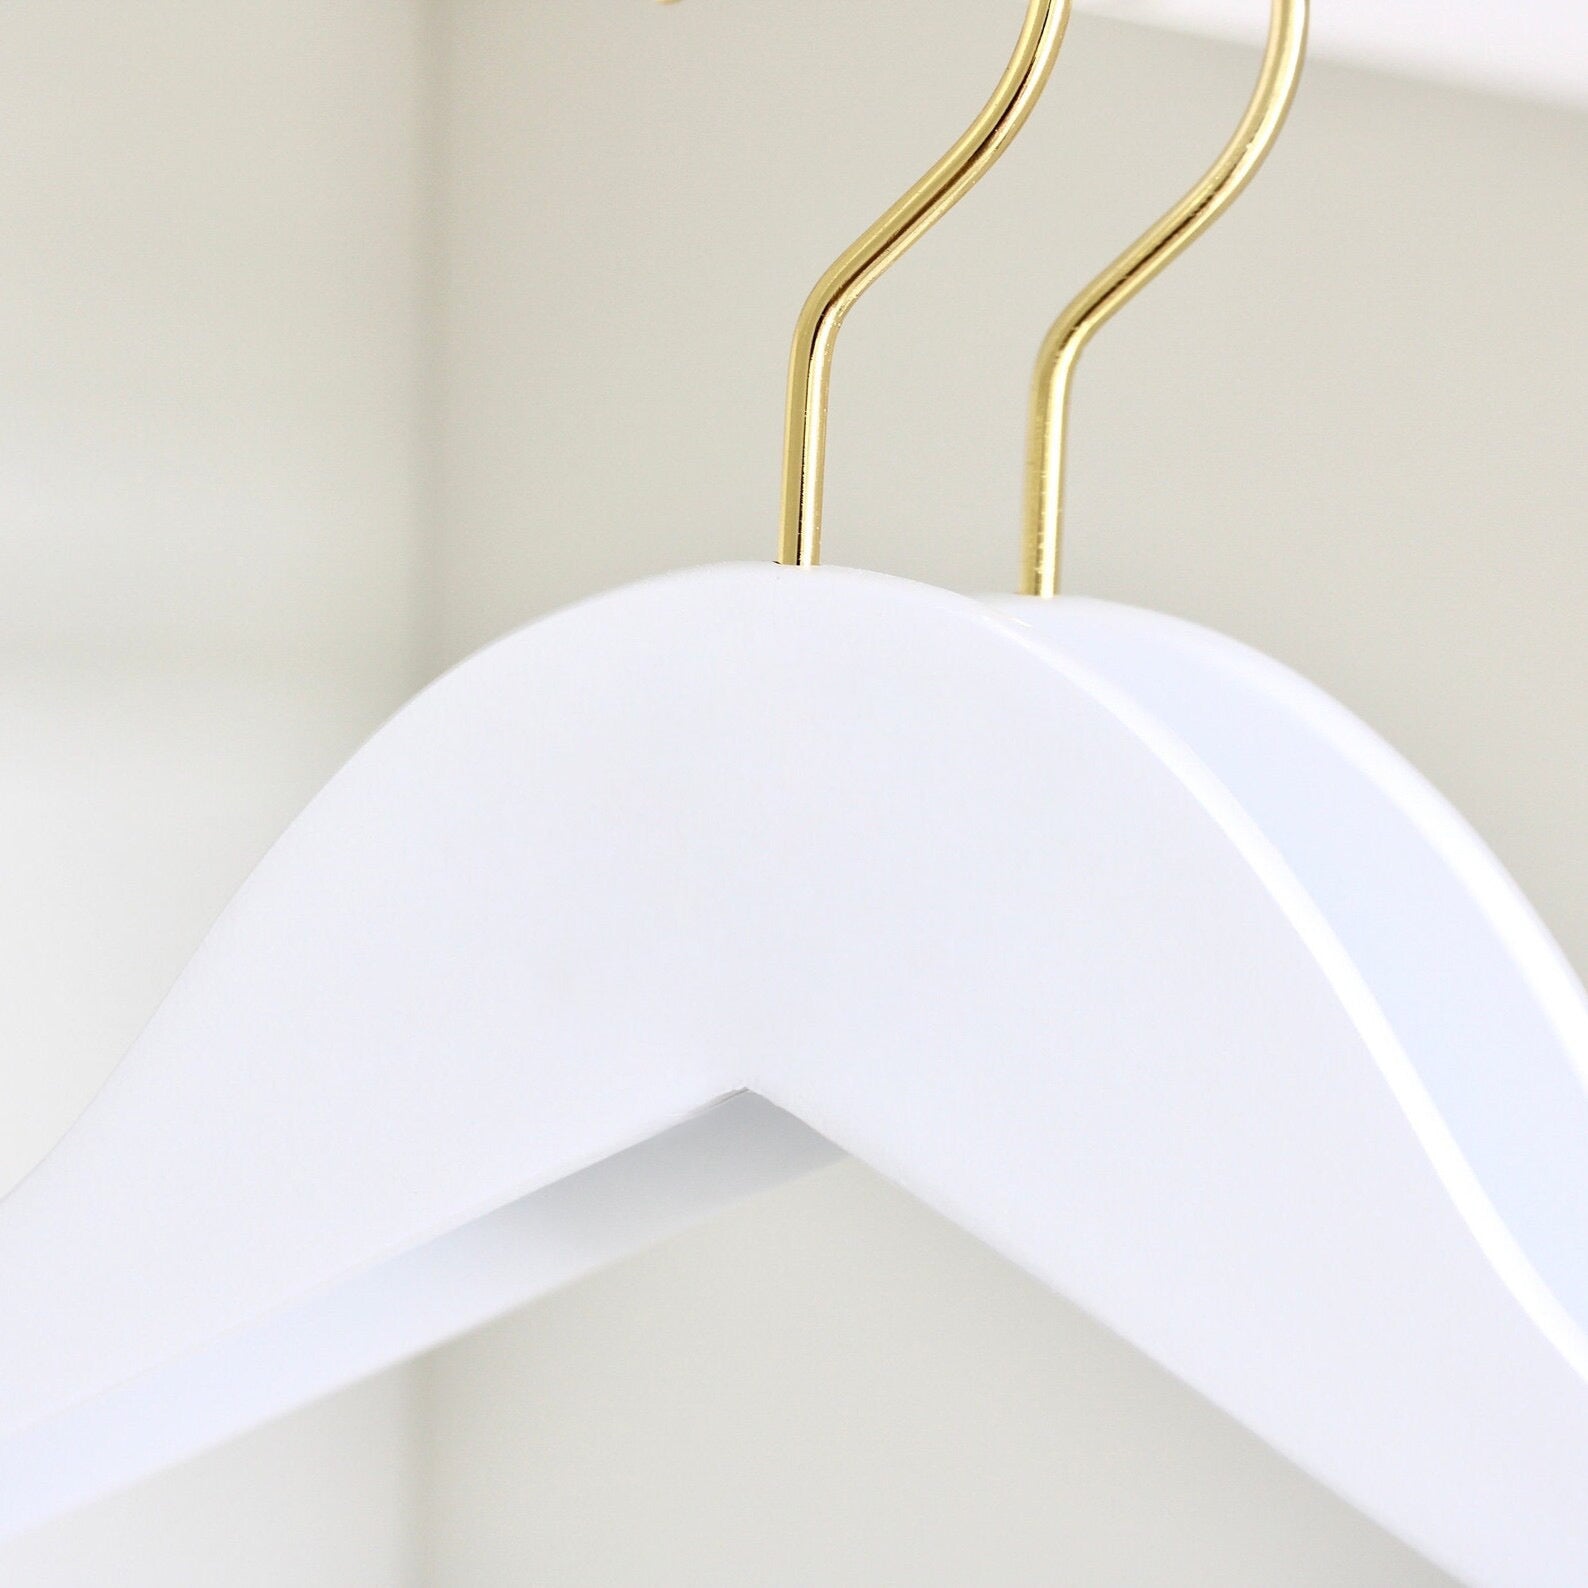 Two wedding quality White Wooden Suit Hangers with gold hooks for custom hanger designers #hook-color_gold-hook